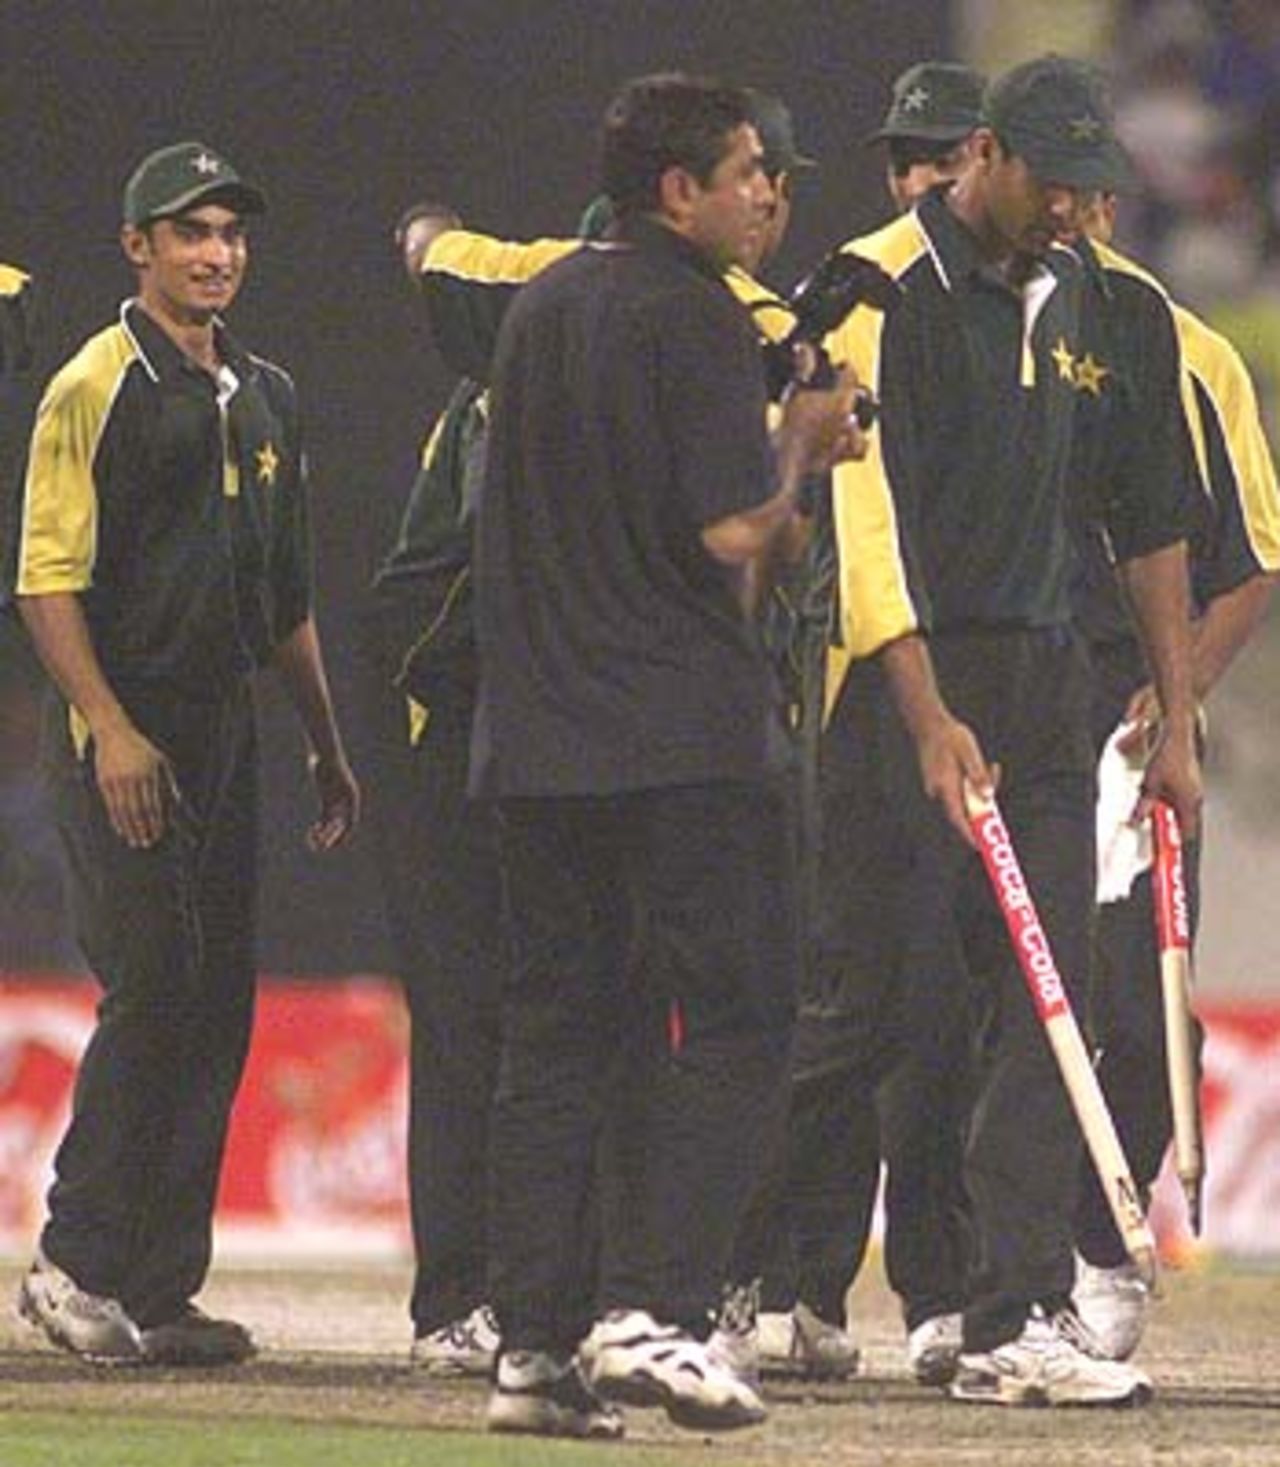 Victorious Pakistanis take stumps out of the ground as souvenirs of a thrilling victory Pakistan v South Africa, Coca-Cola Cup 1999/00, Final, Sharjah C.A. Stadium, 31 March 2000.